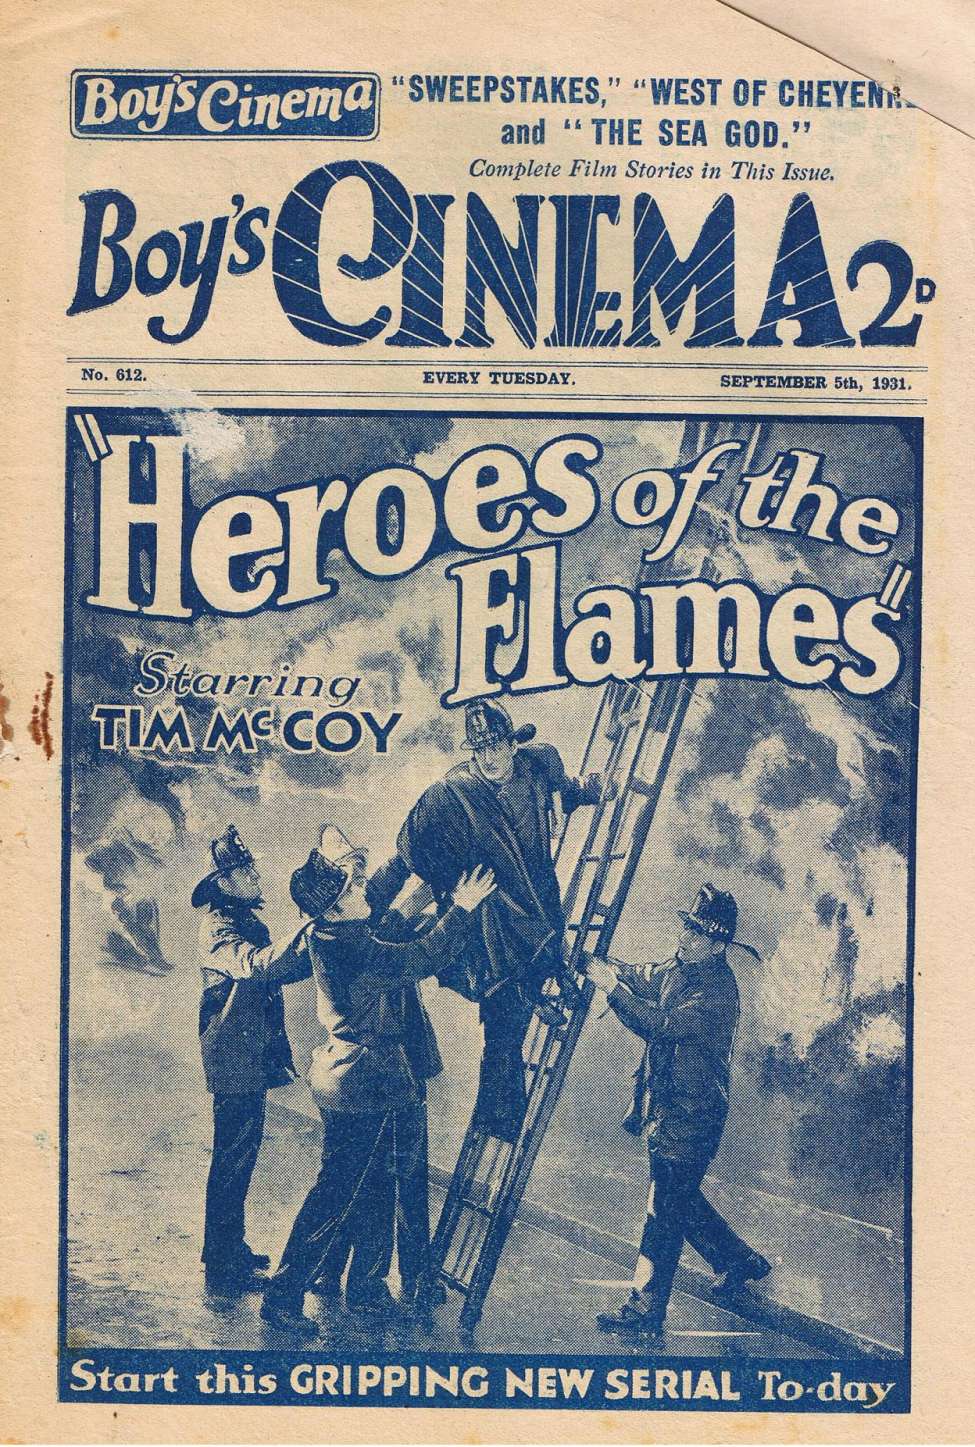 Book Cover For Boy's Cinema 612 - Heroes of the Flames - Tim McCoy